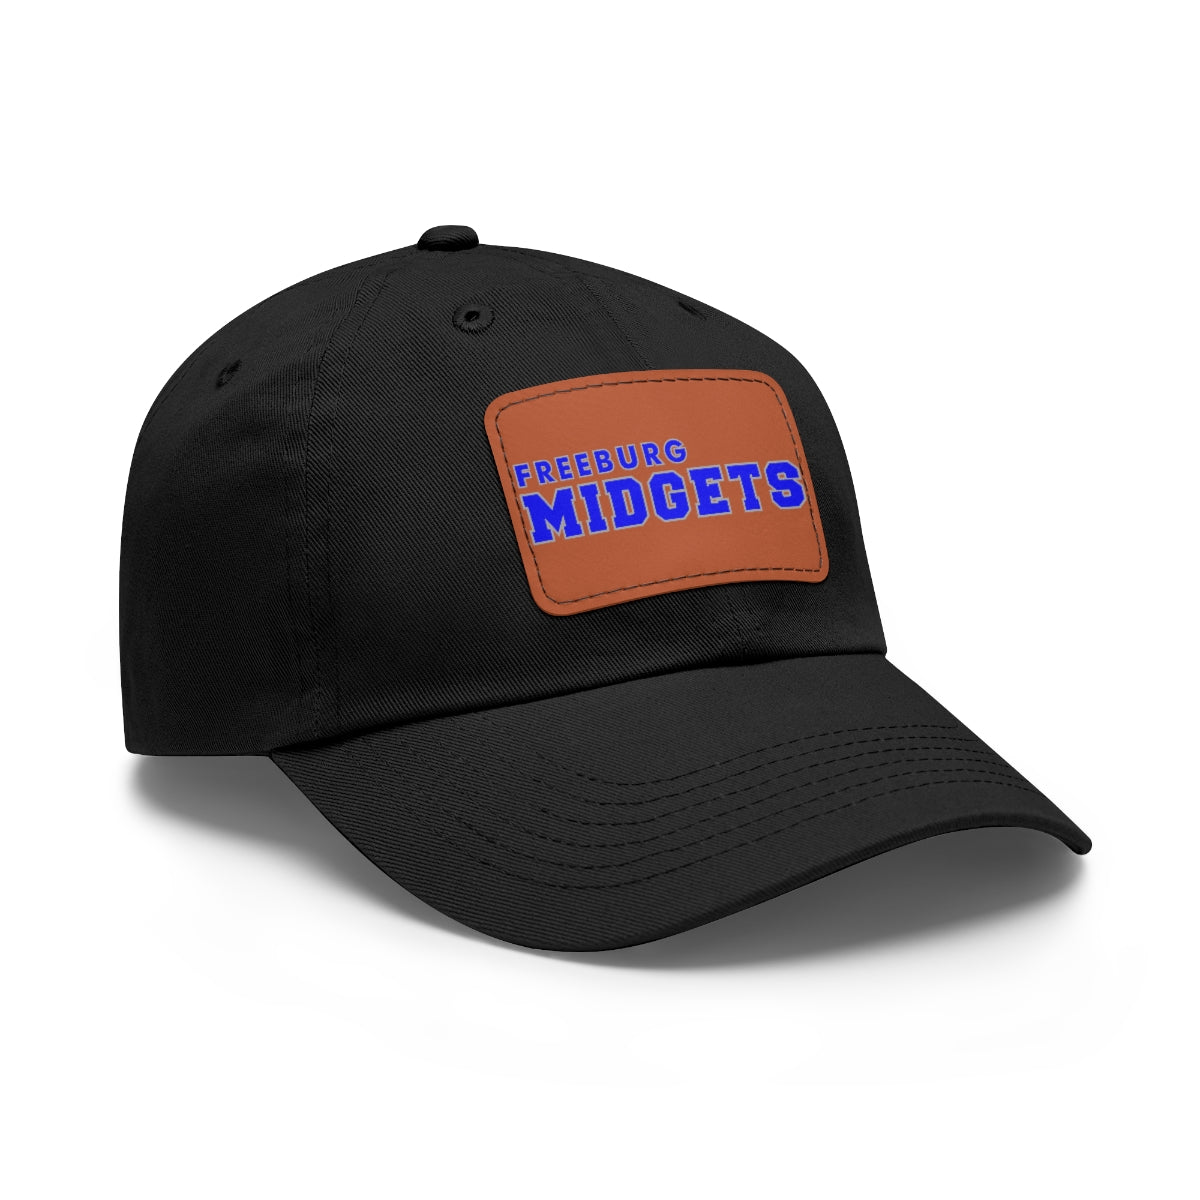 Freeburg Midgets Varsity Letters Dad Hat with Leather Patch